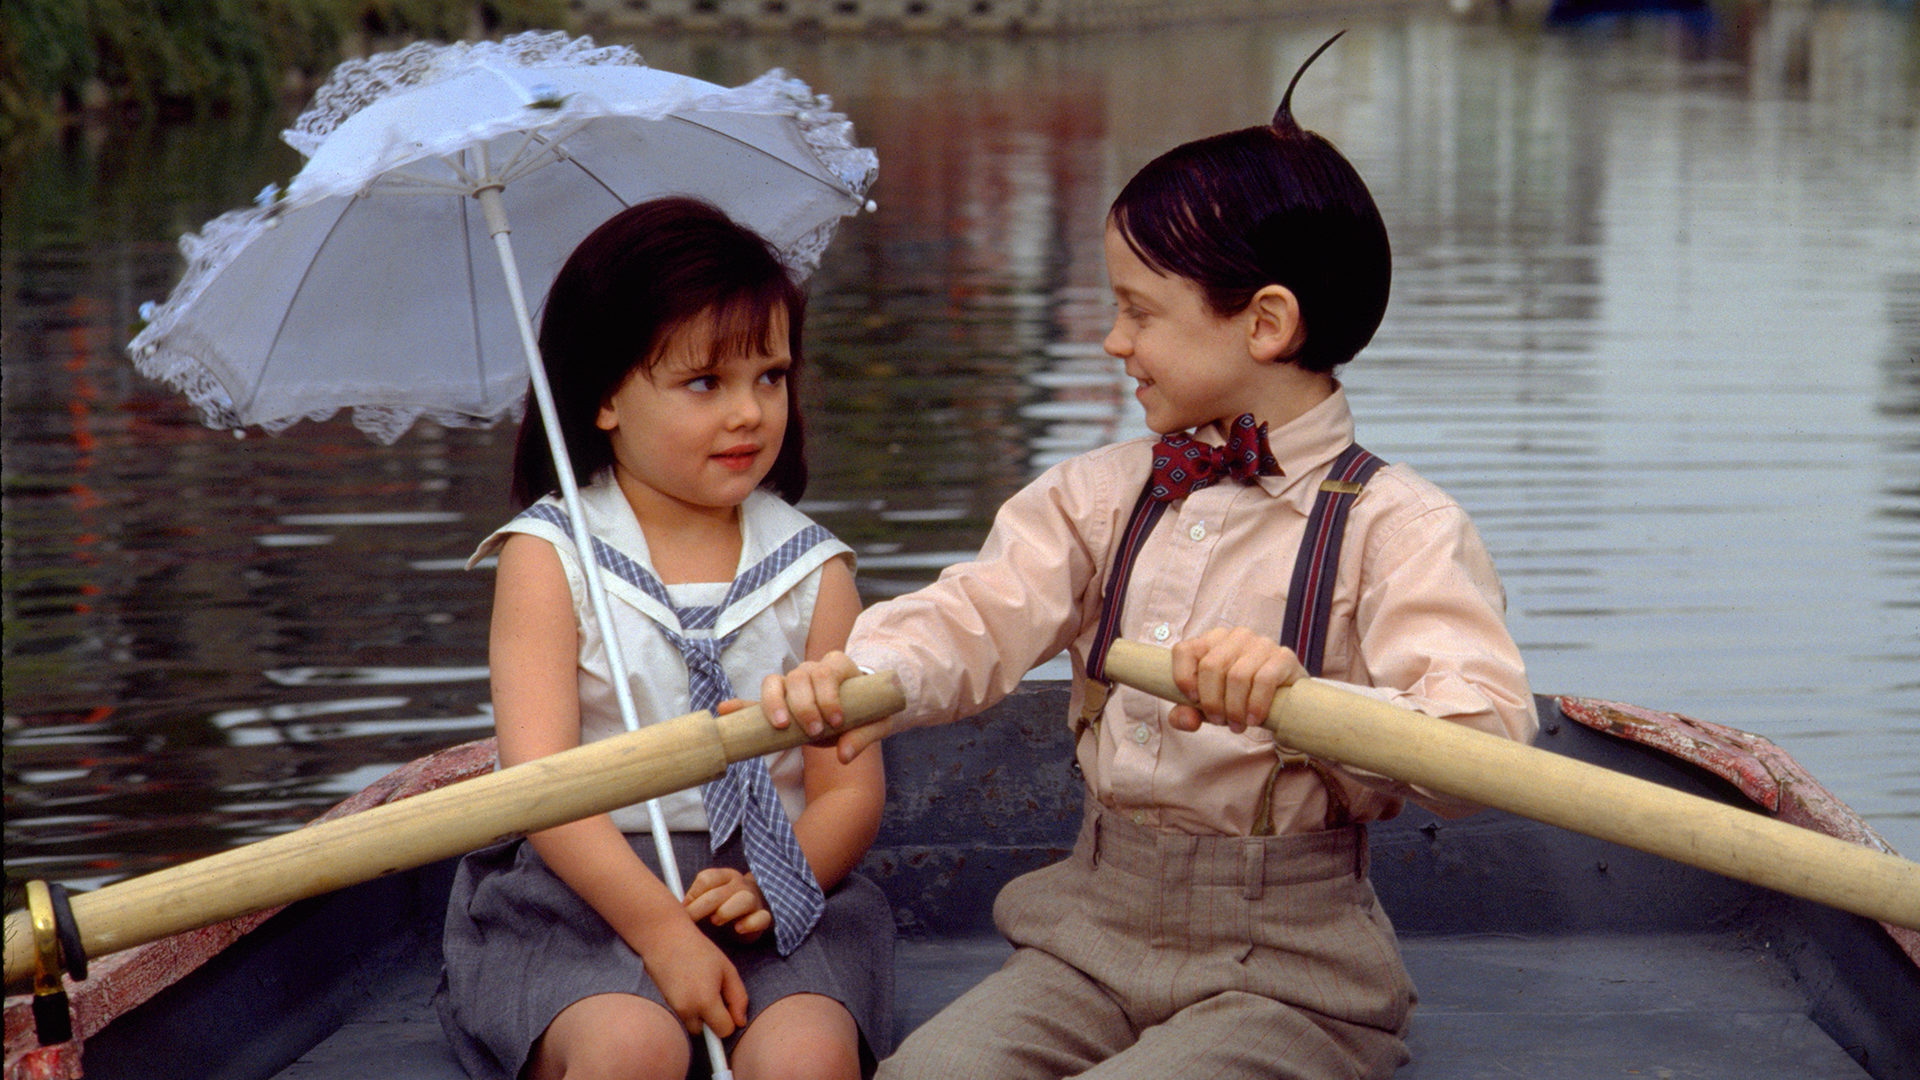 The Little Rascals (1994) - About the Movie